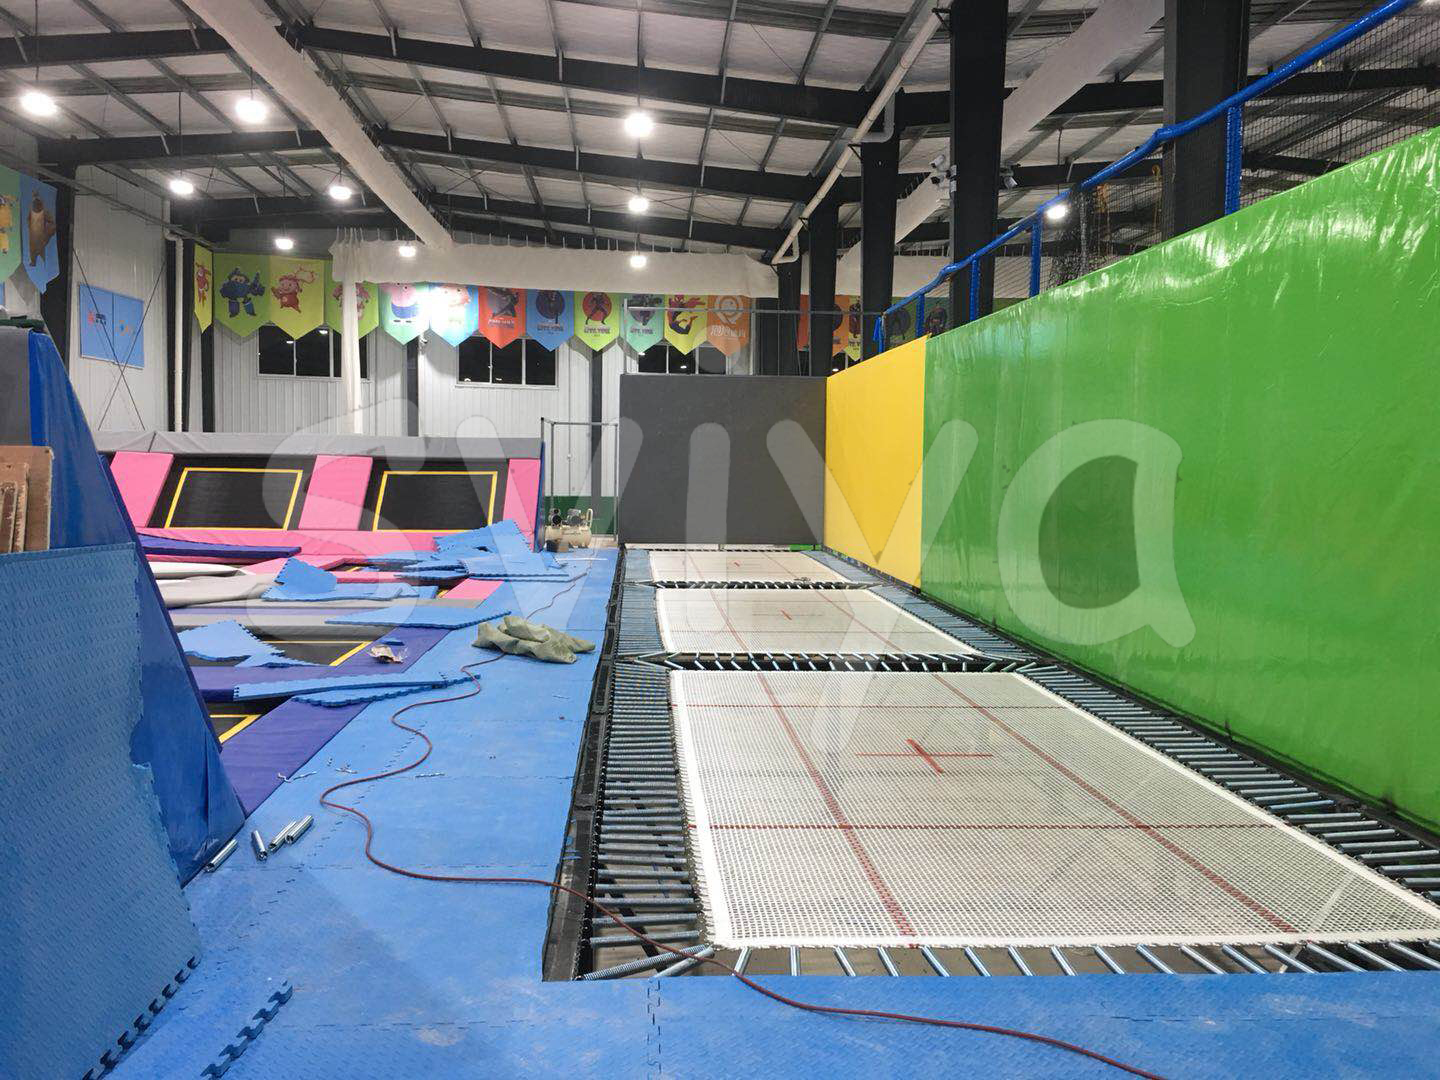 Wholesale Jumping Bed Indoor Trampoline Park